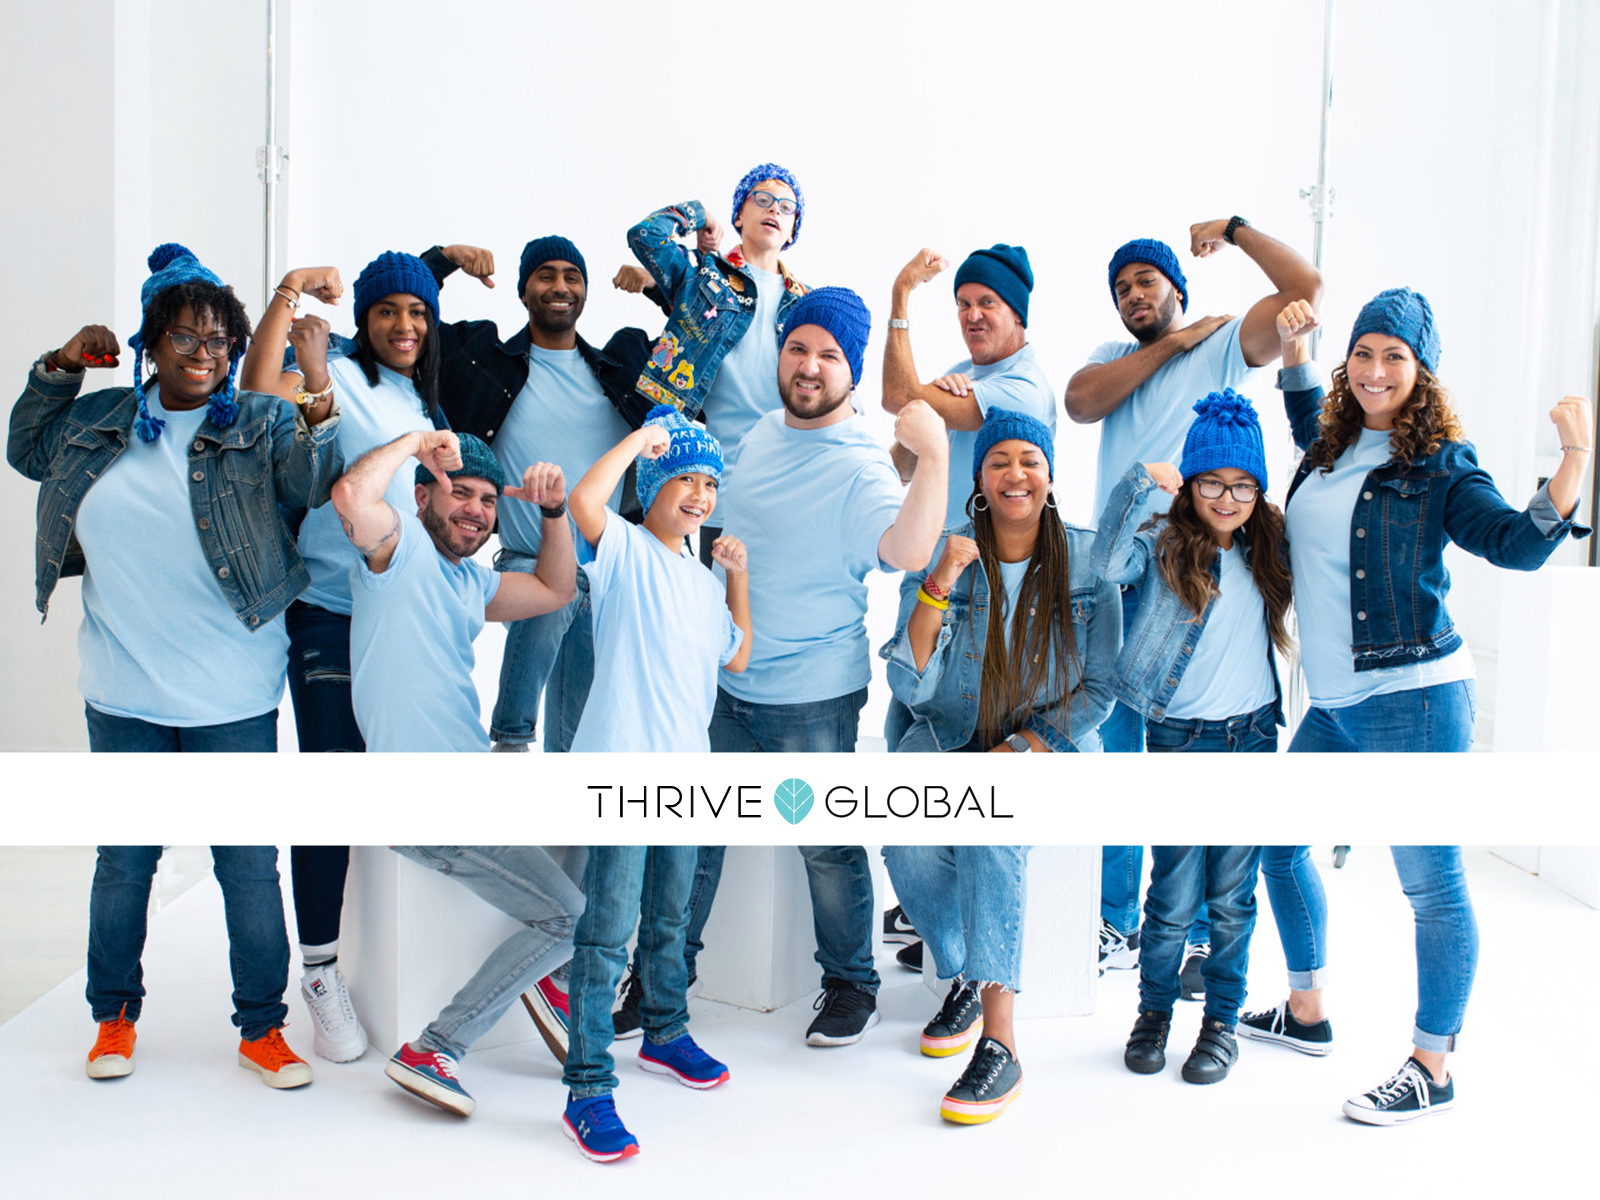 Thrive Global logo overlaid on image of Shira and friends in blue hats